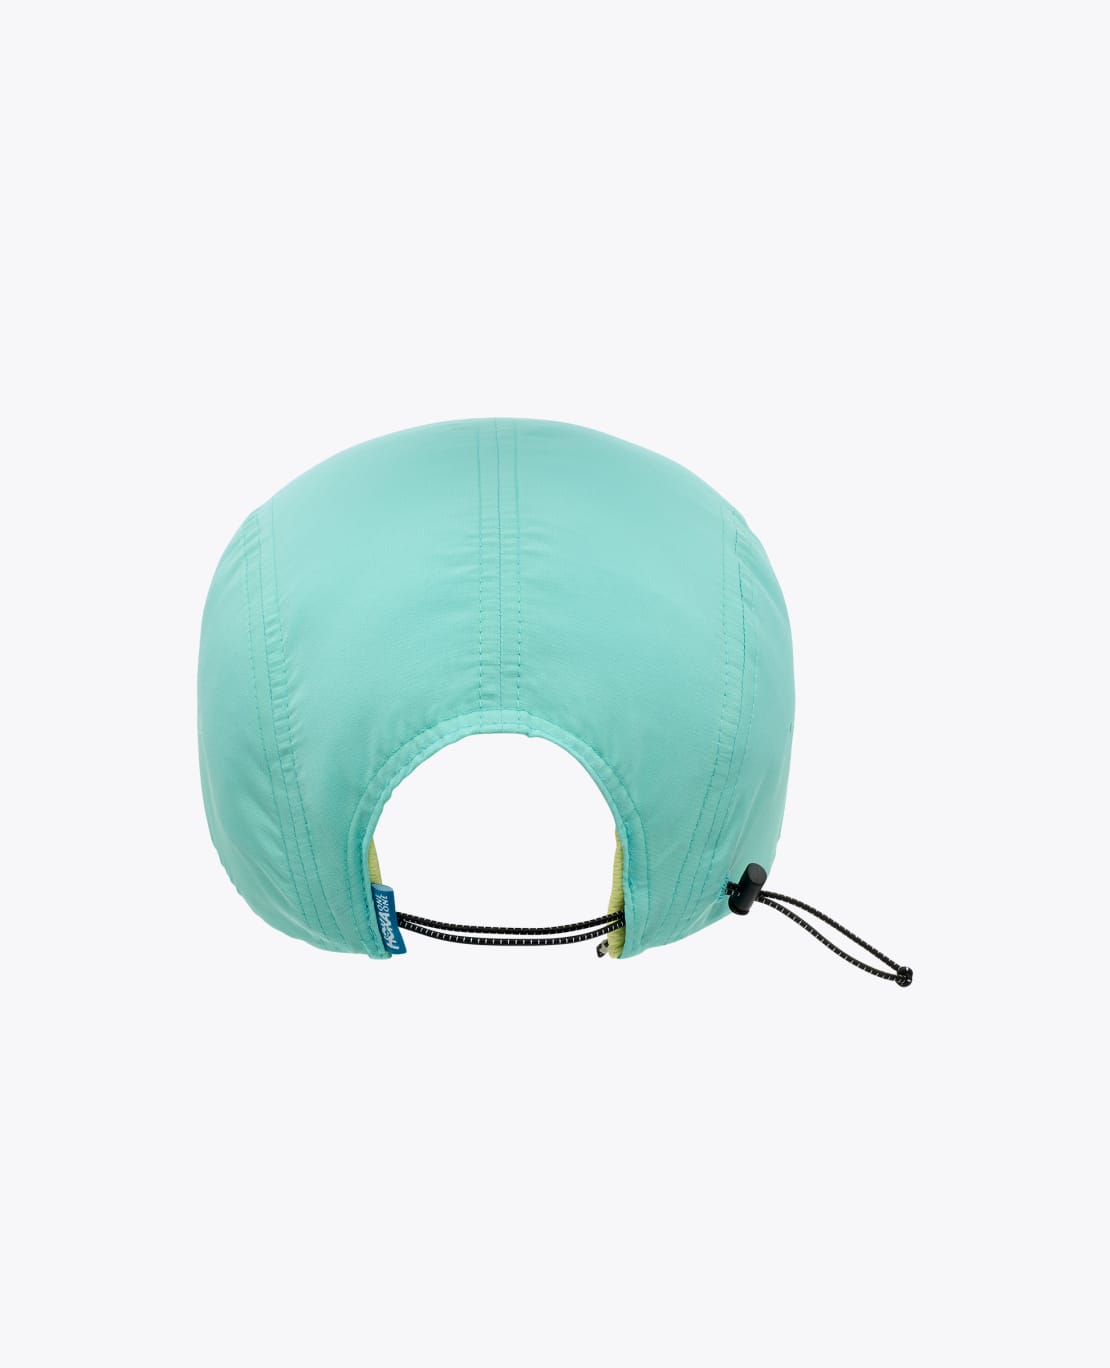 HOKA® Packable Trail Hat for